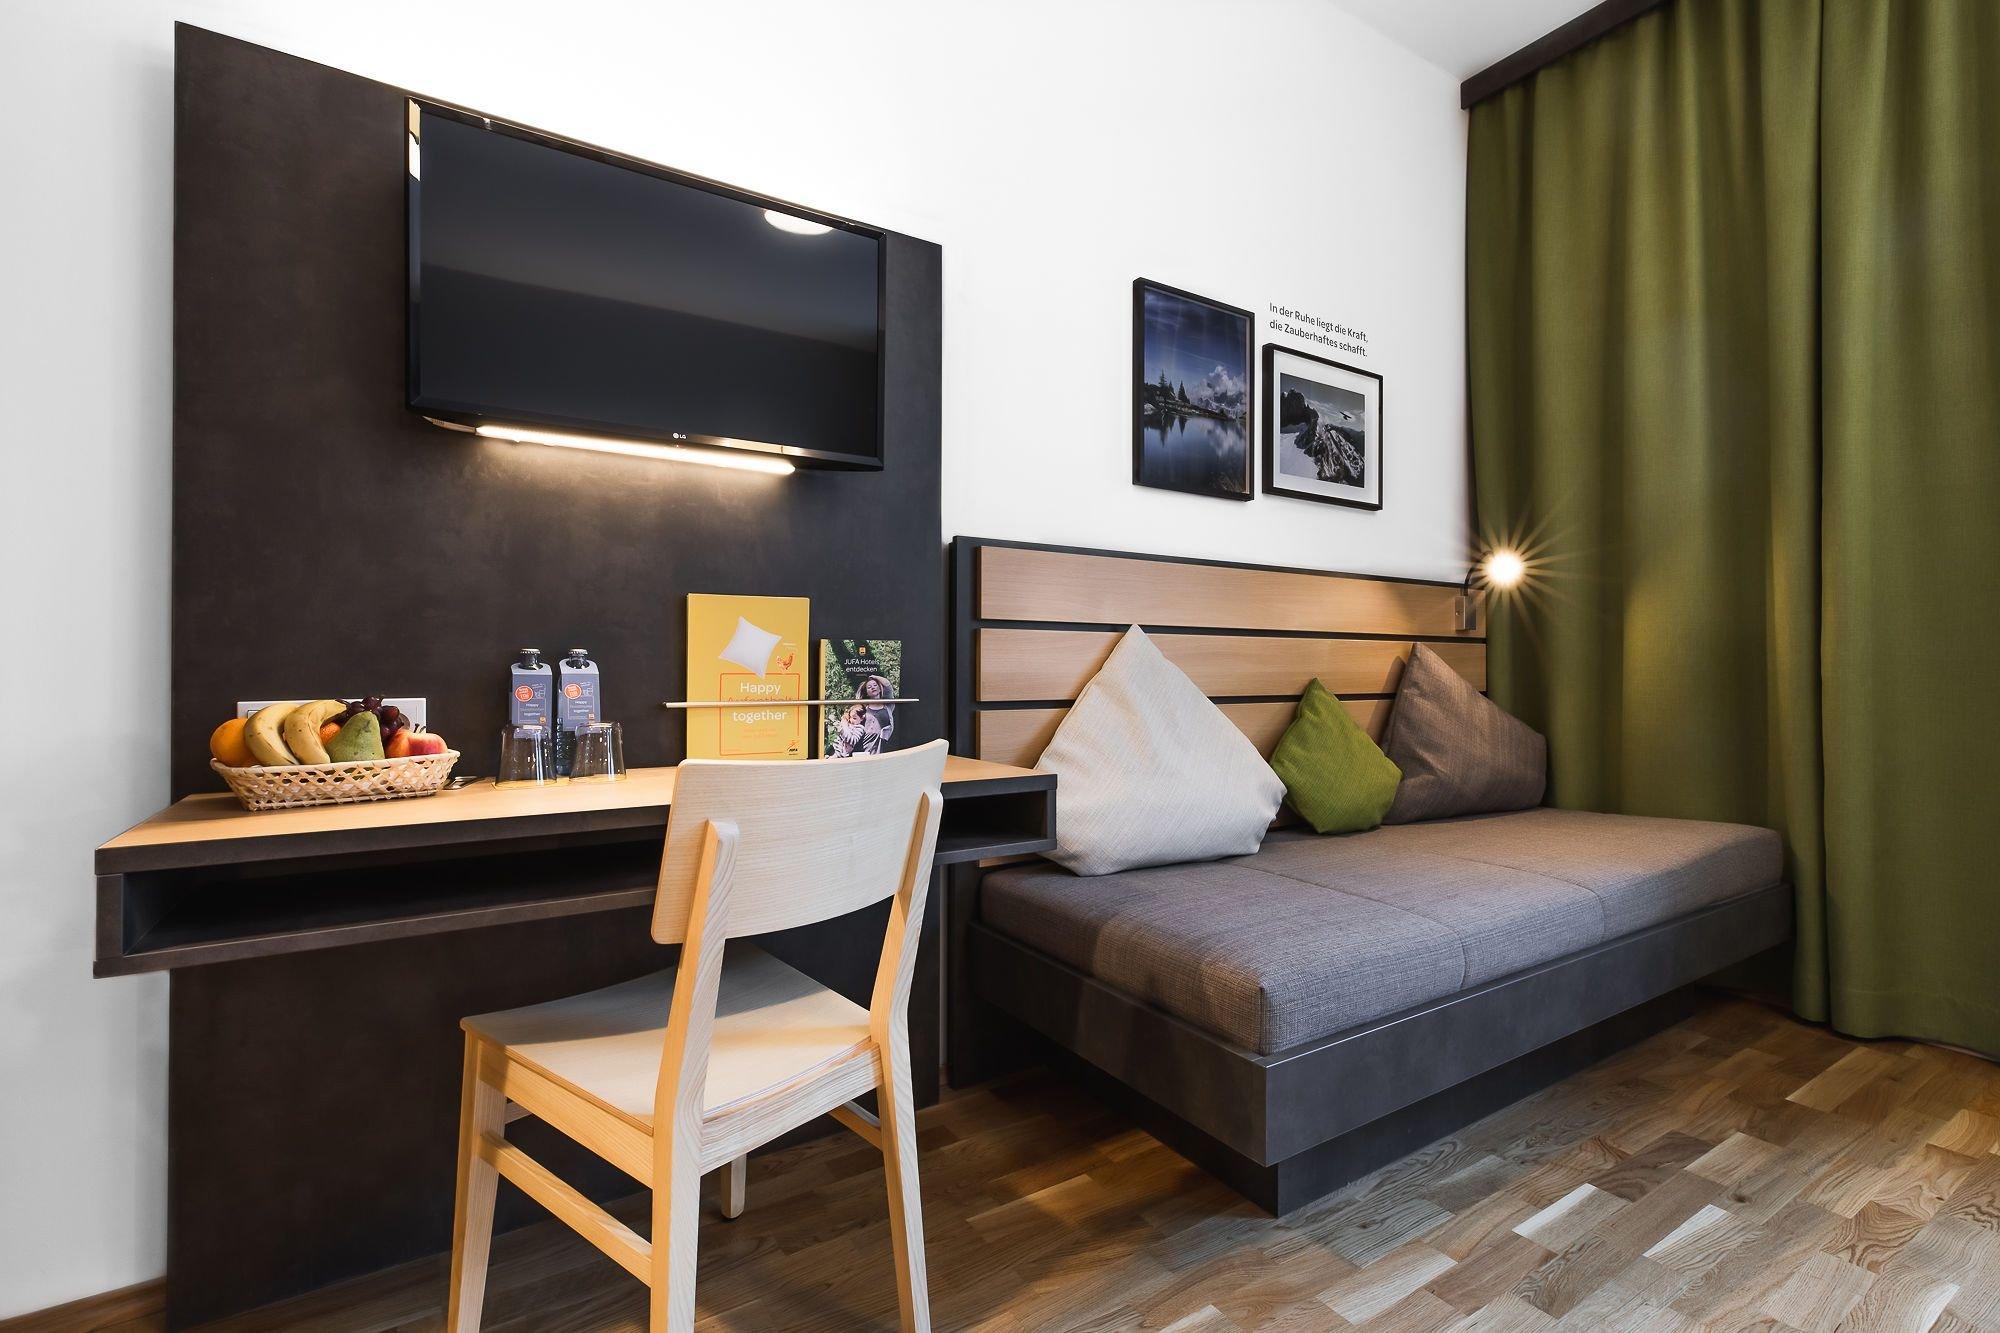 Modern, bright and friendly rooms with normal double bed or comfortable box-spring bed, sofa, shower, WC and hair dryer, TV, free WIFI, safe and folding bench.